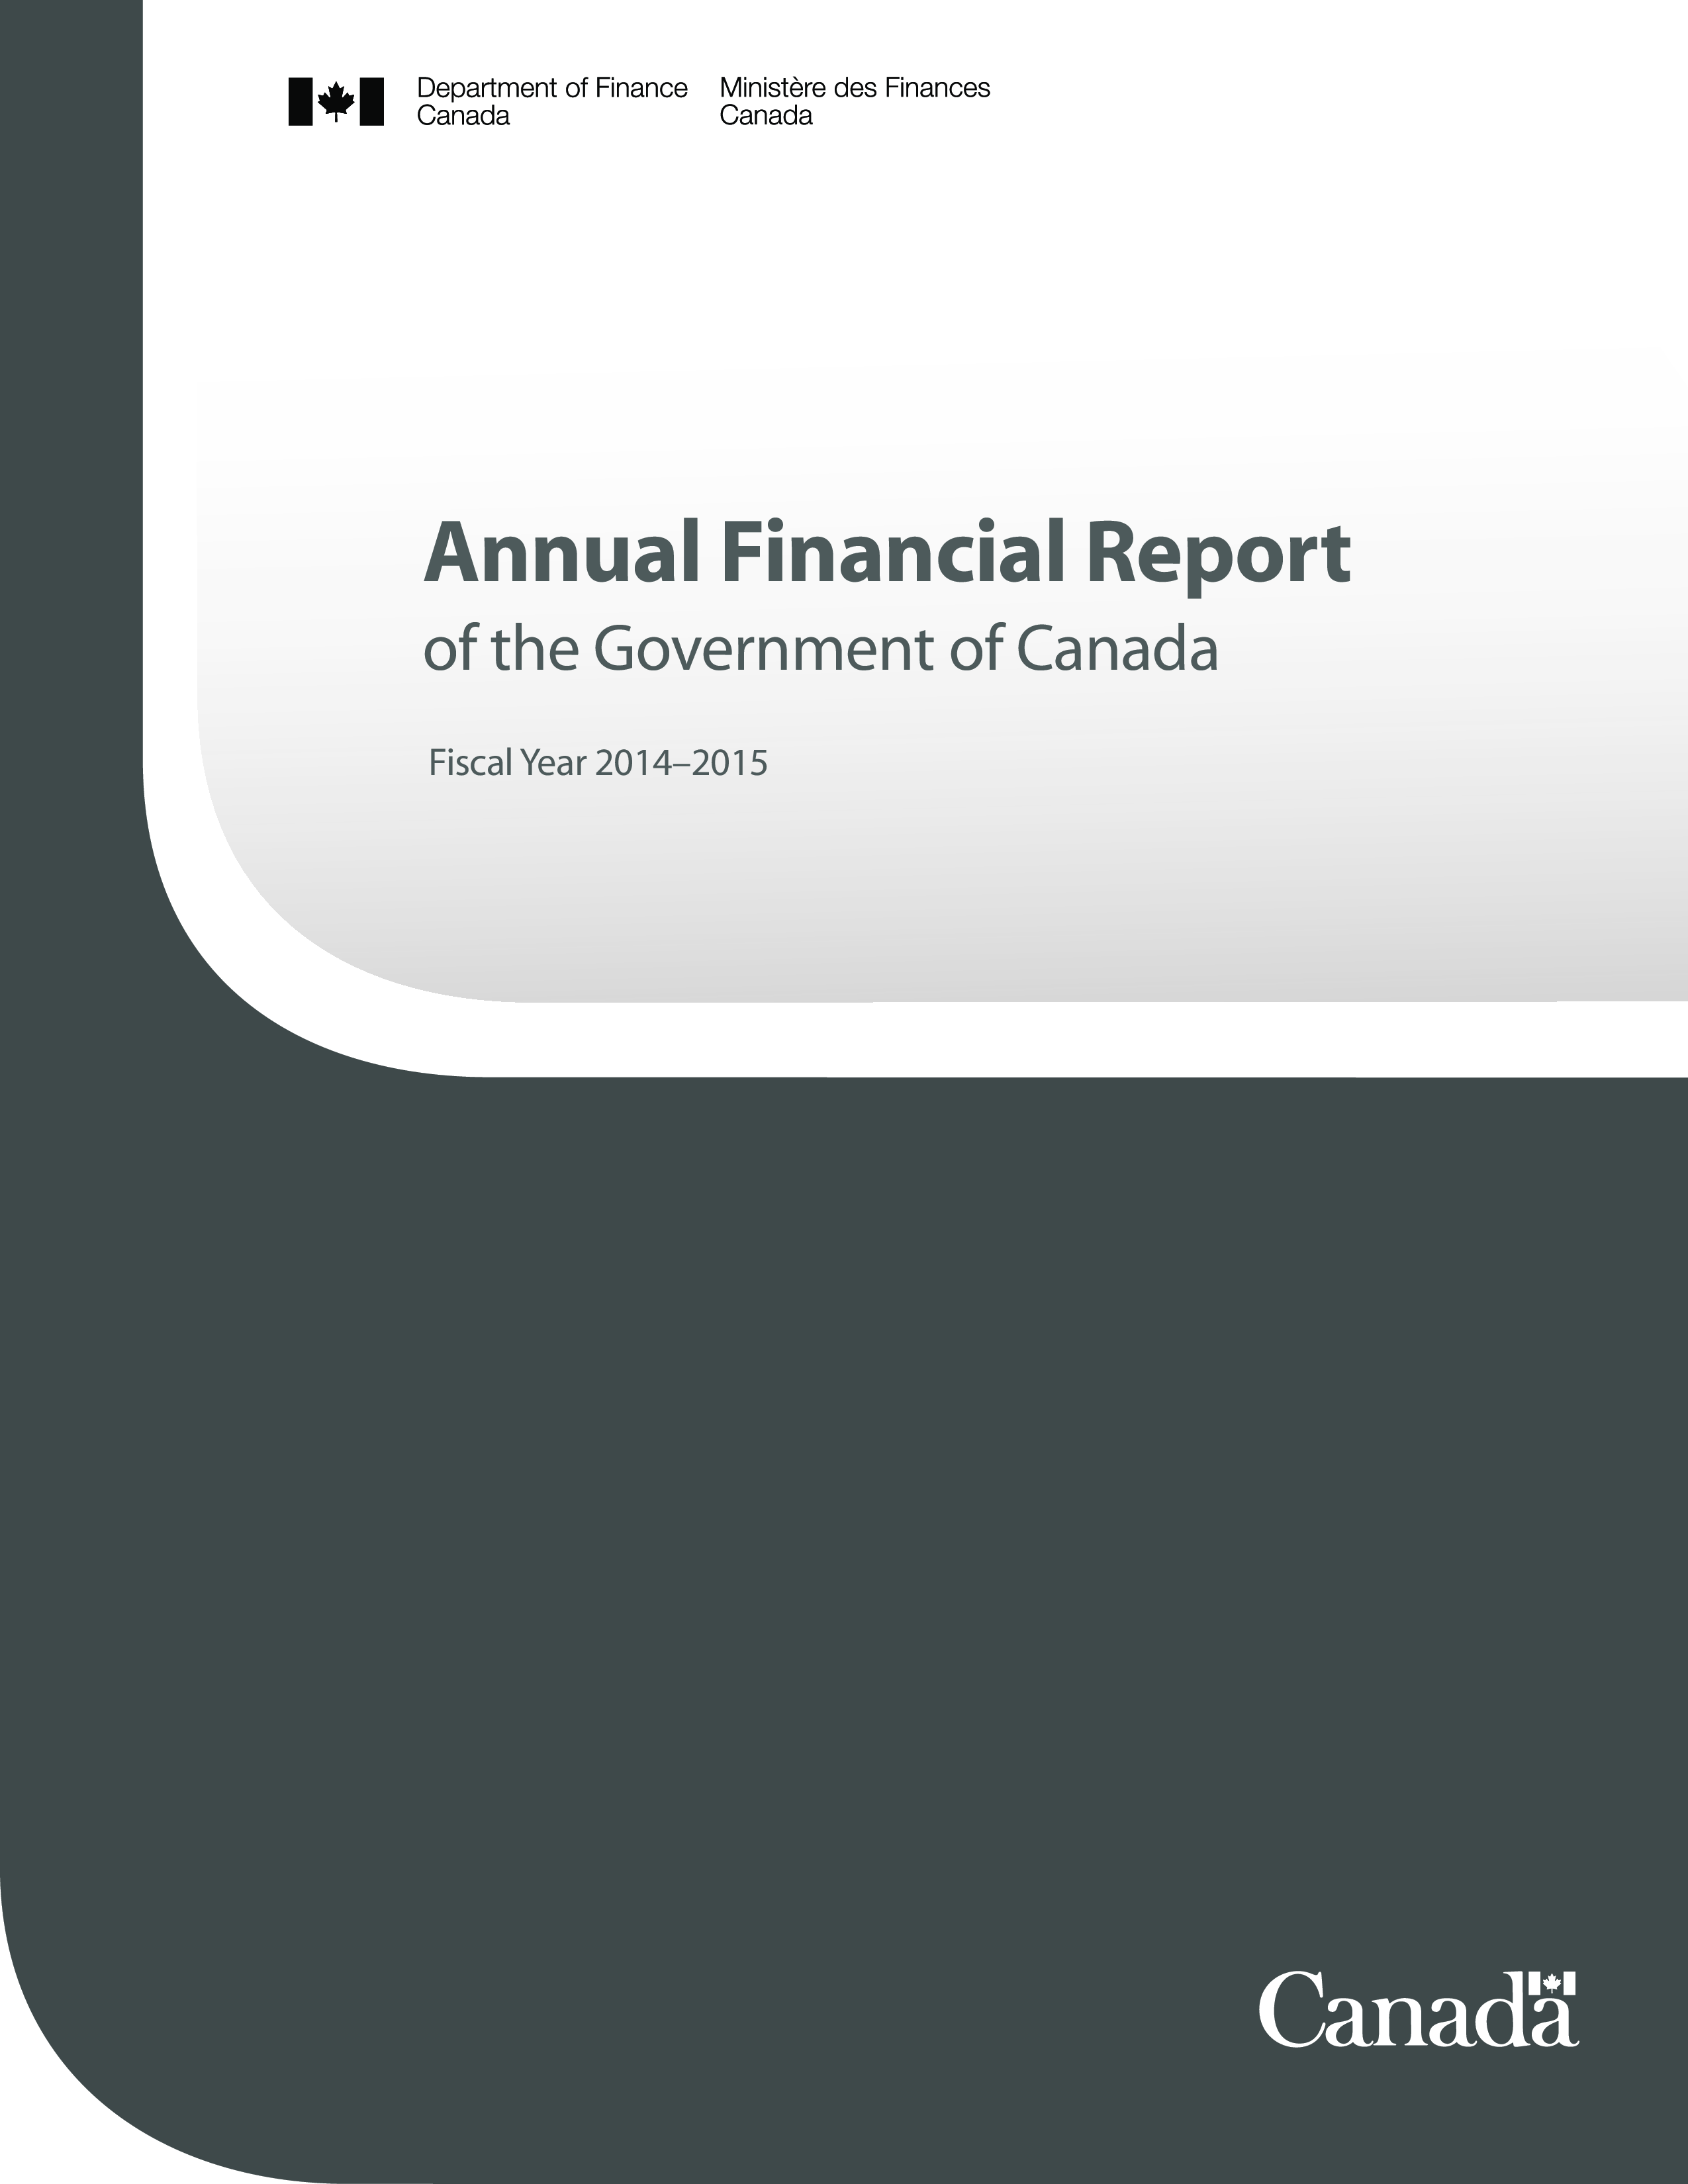 Annual Financial Expense Report main image